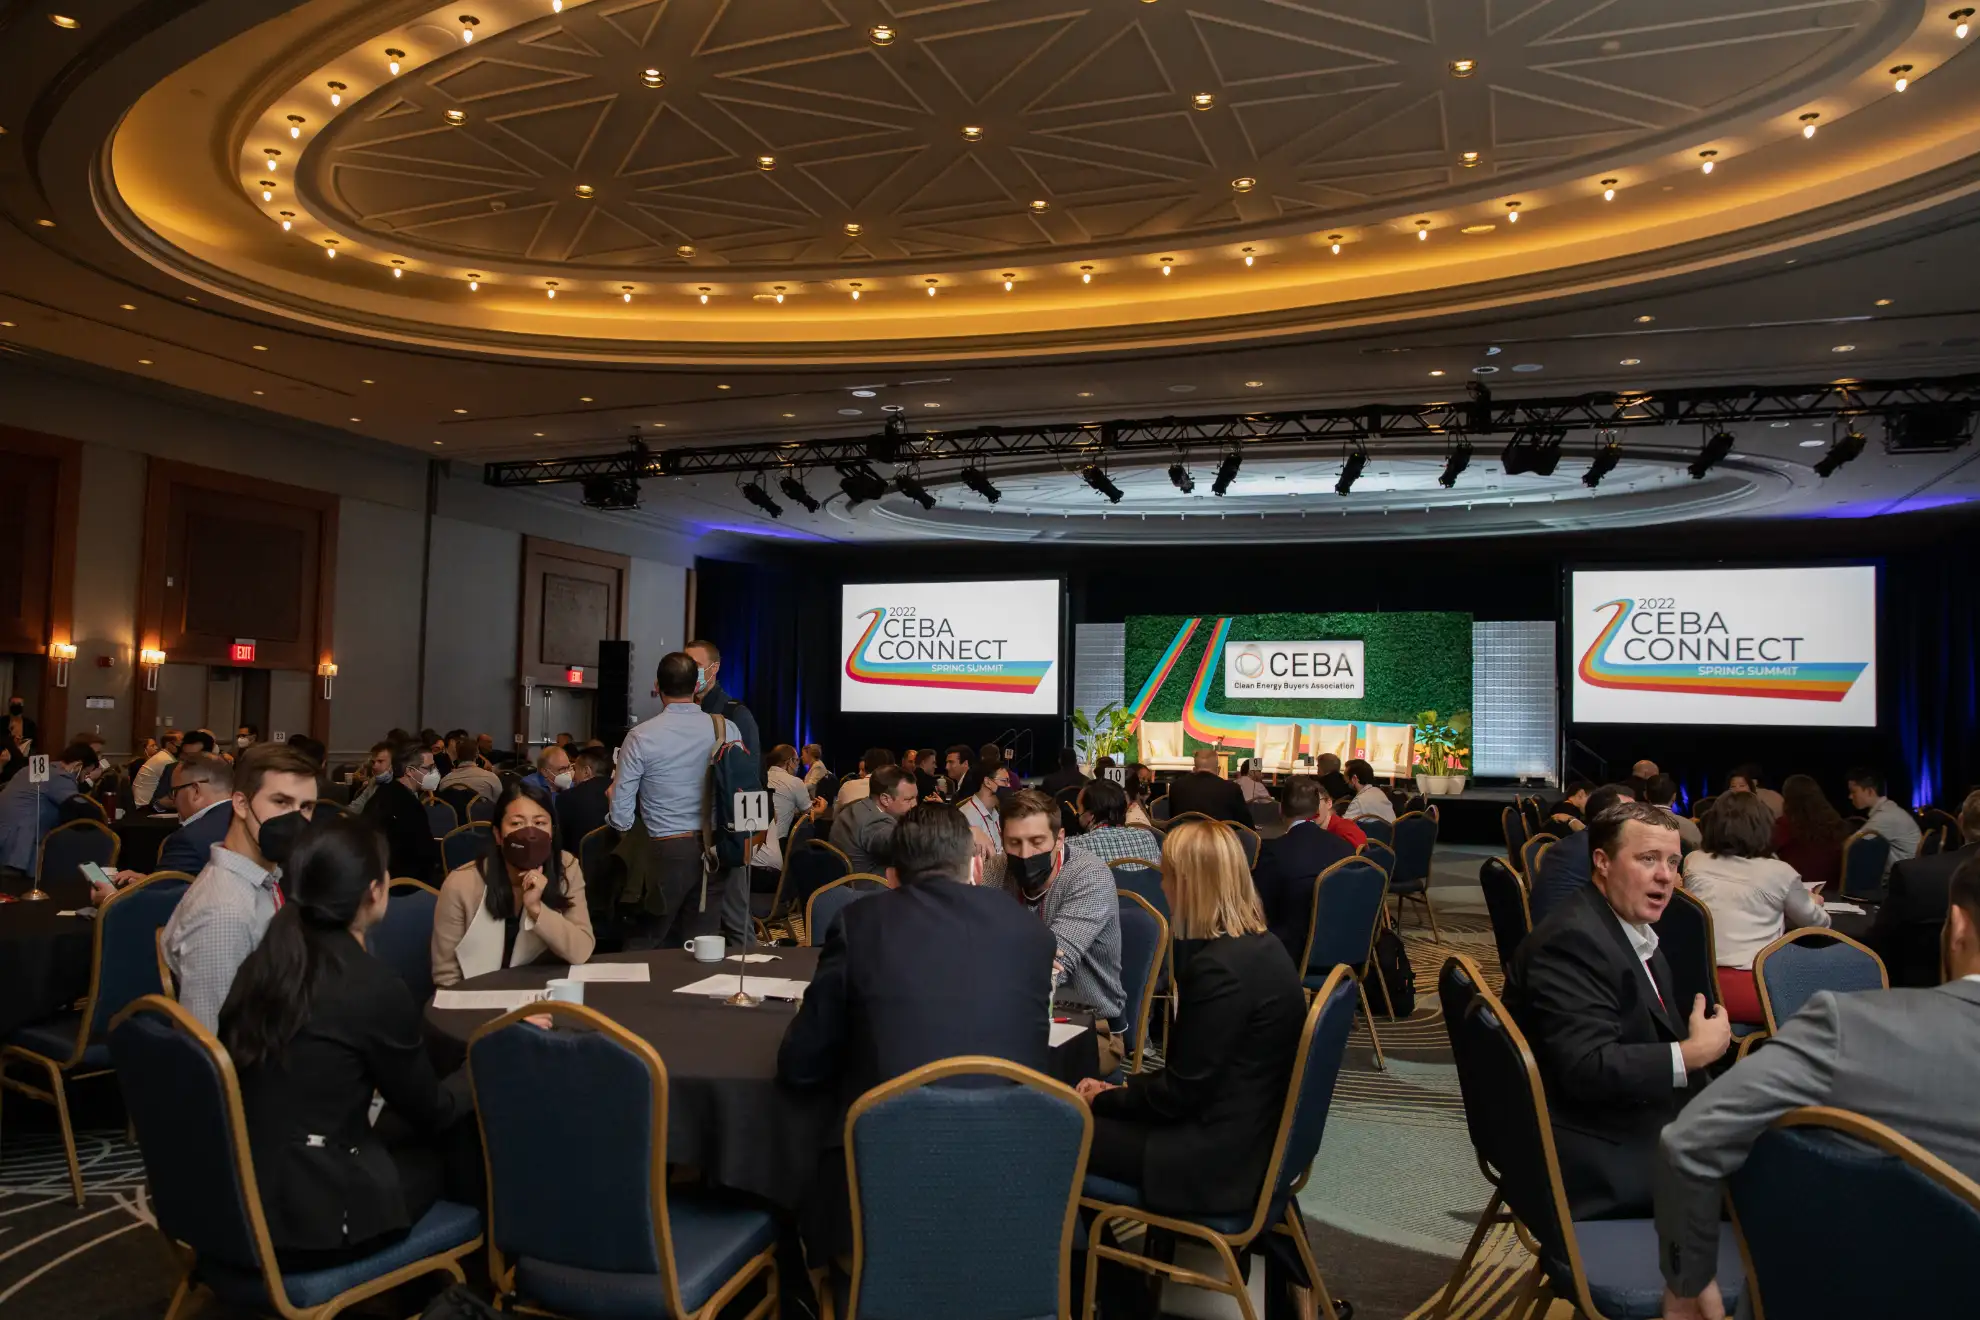 Photo of people attending the CEBA Connect Conference.